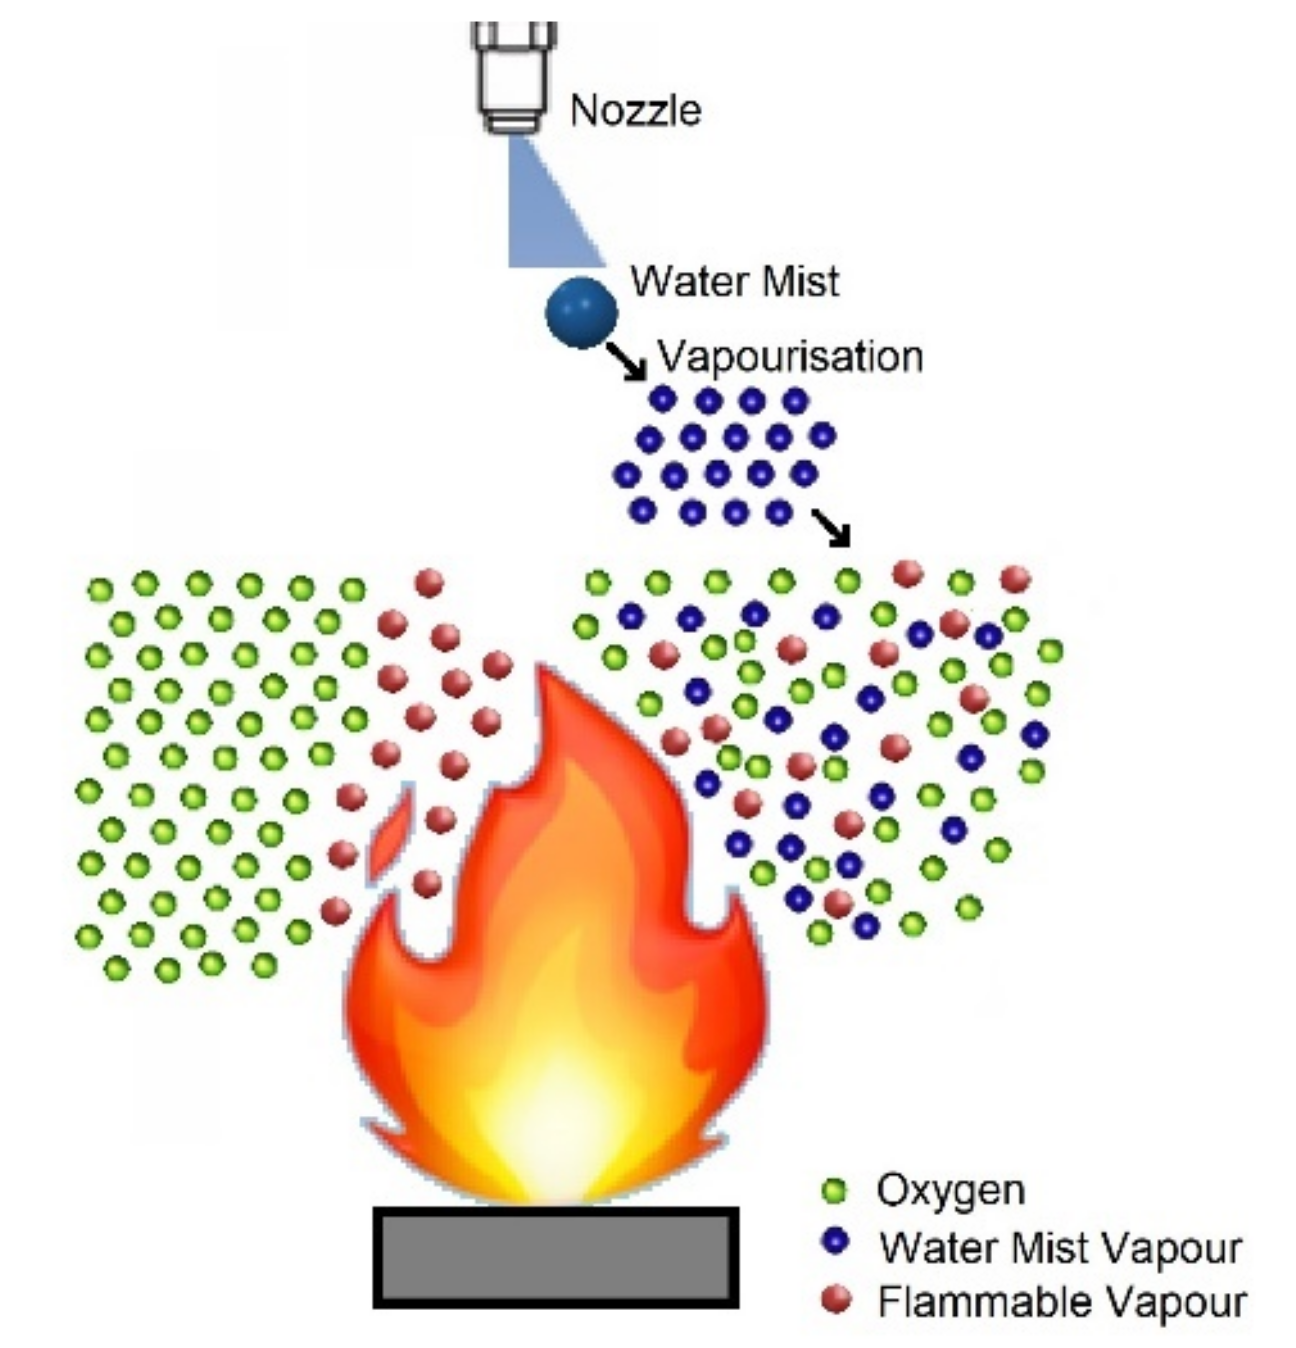 Energies | Free Full-Text | A Review of Lithium-Ion Battery Fire Suppression